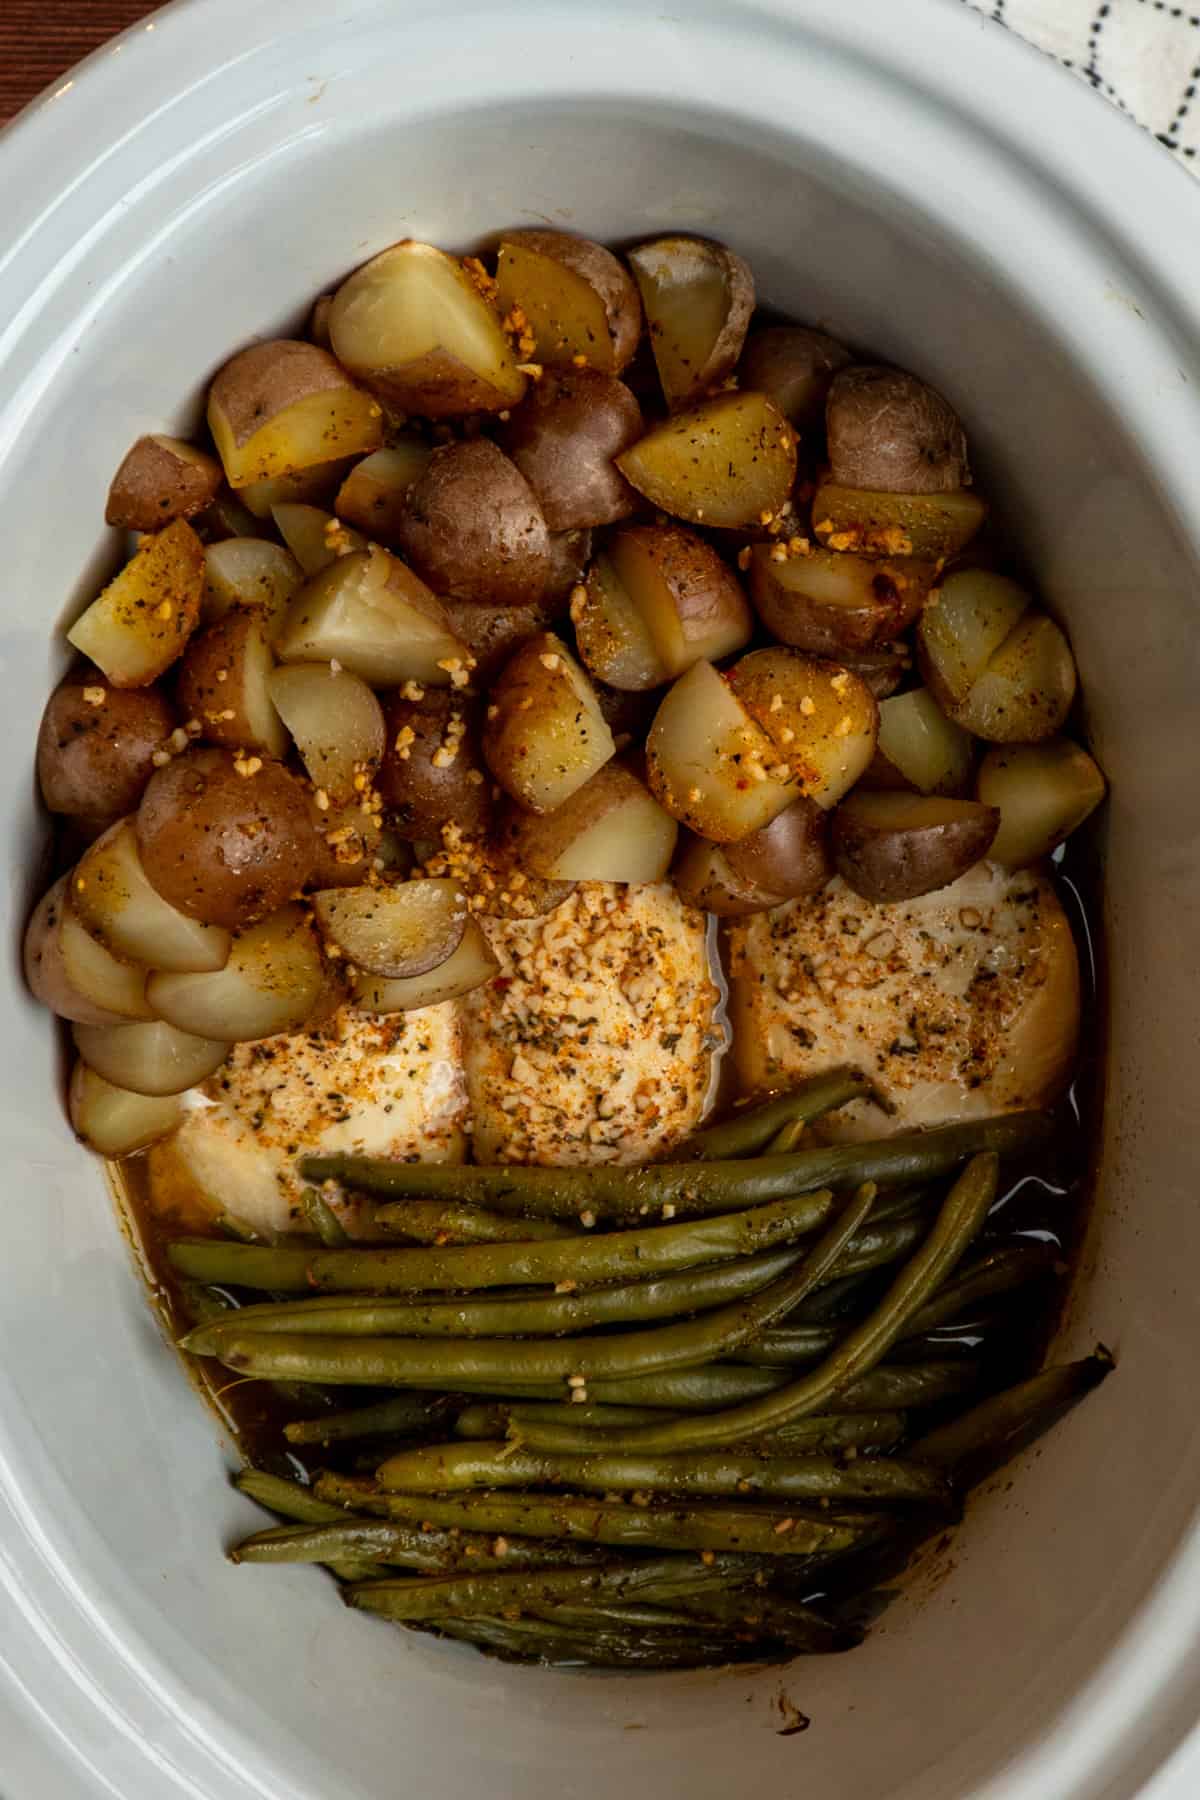 Chicken, potatoes and green beans that have been cooked in a white slow cooker.